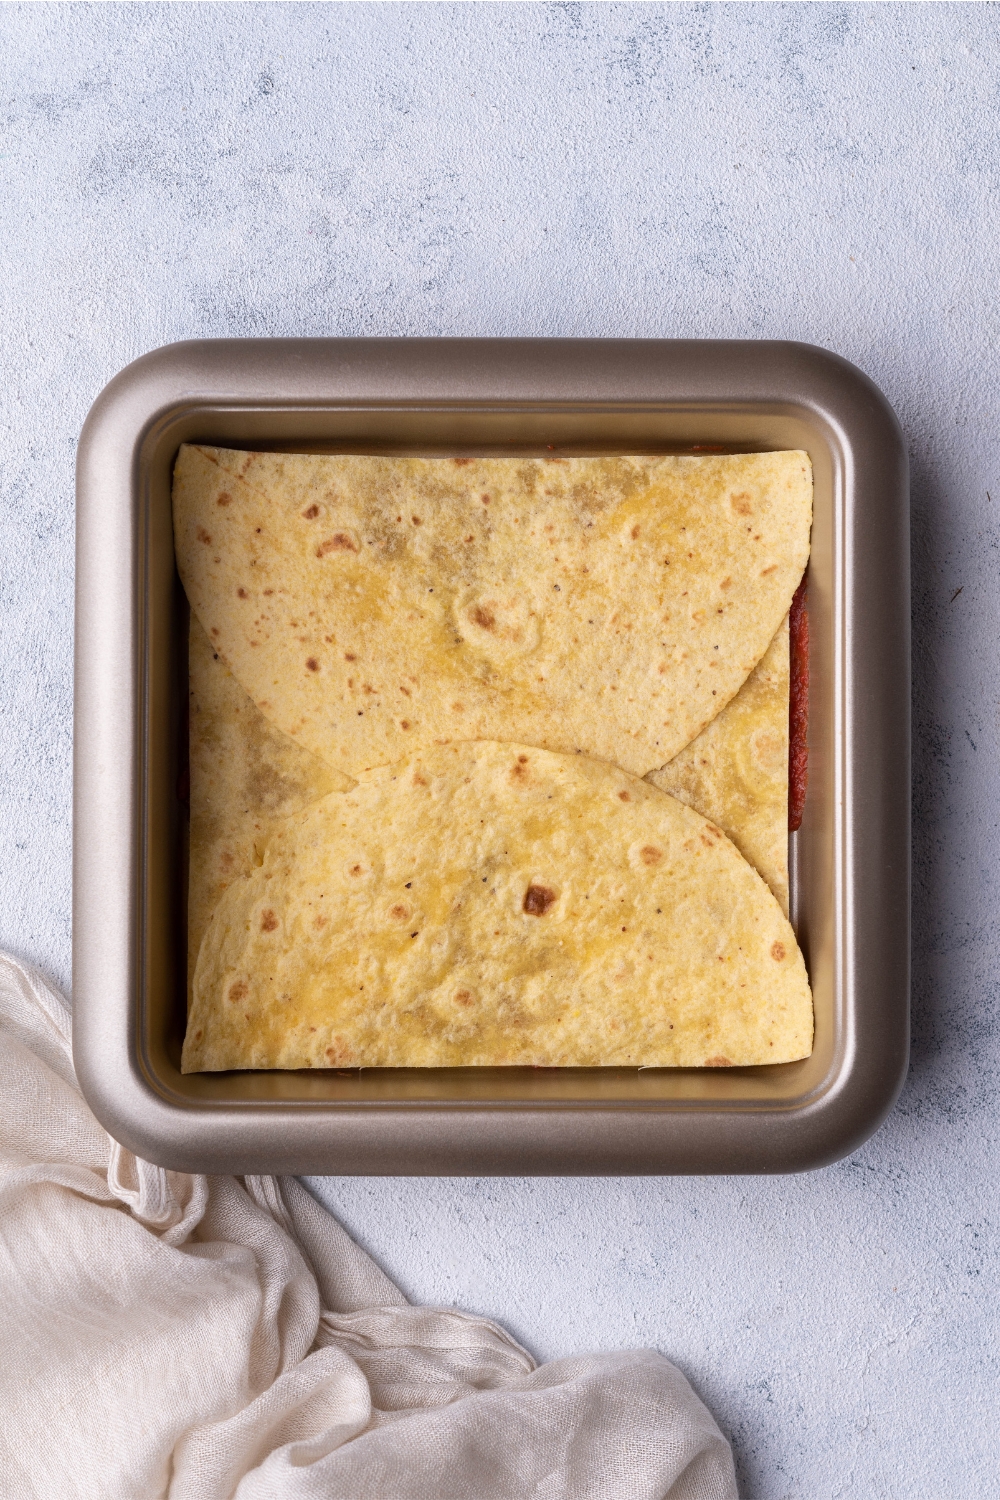 Halved tortilla shells in a square baking dish.